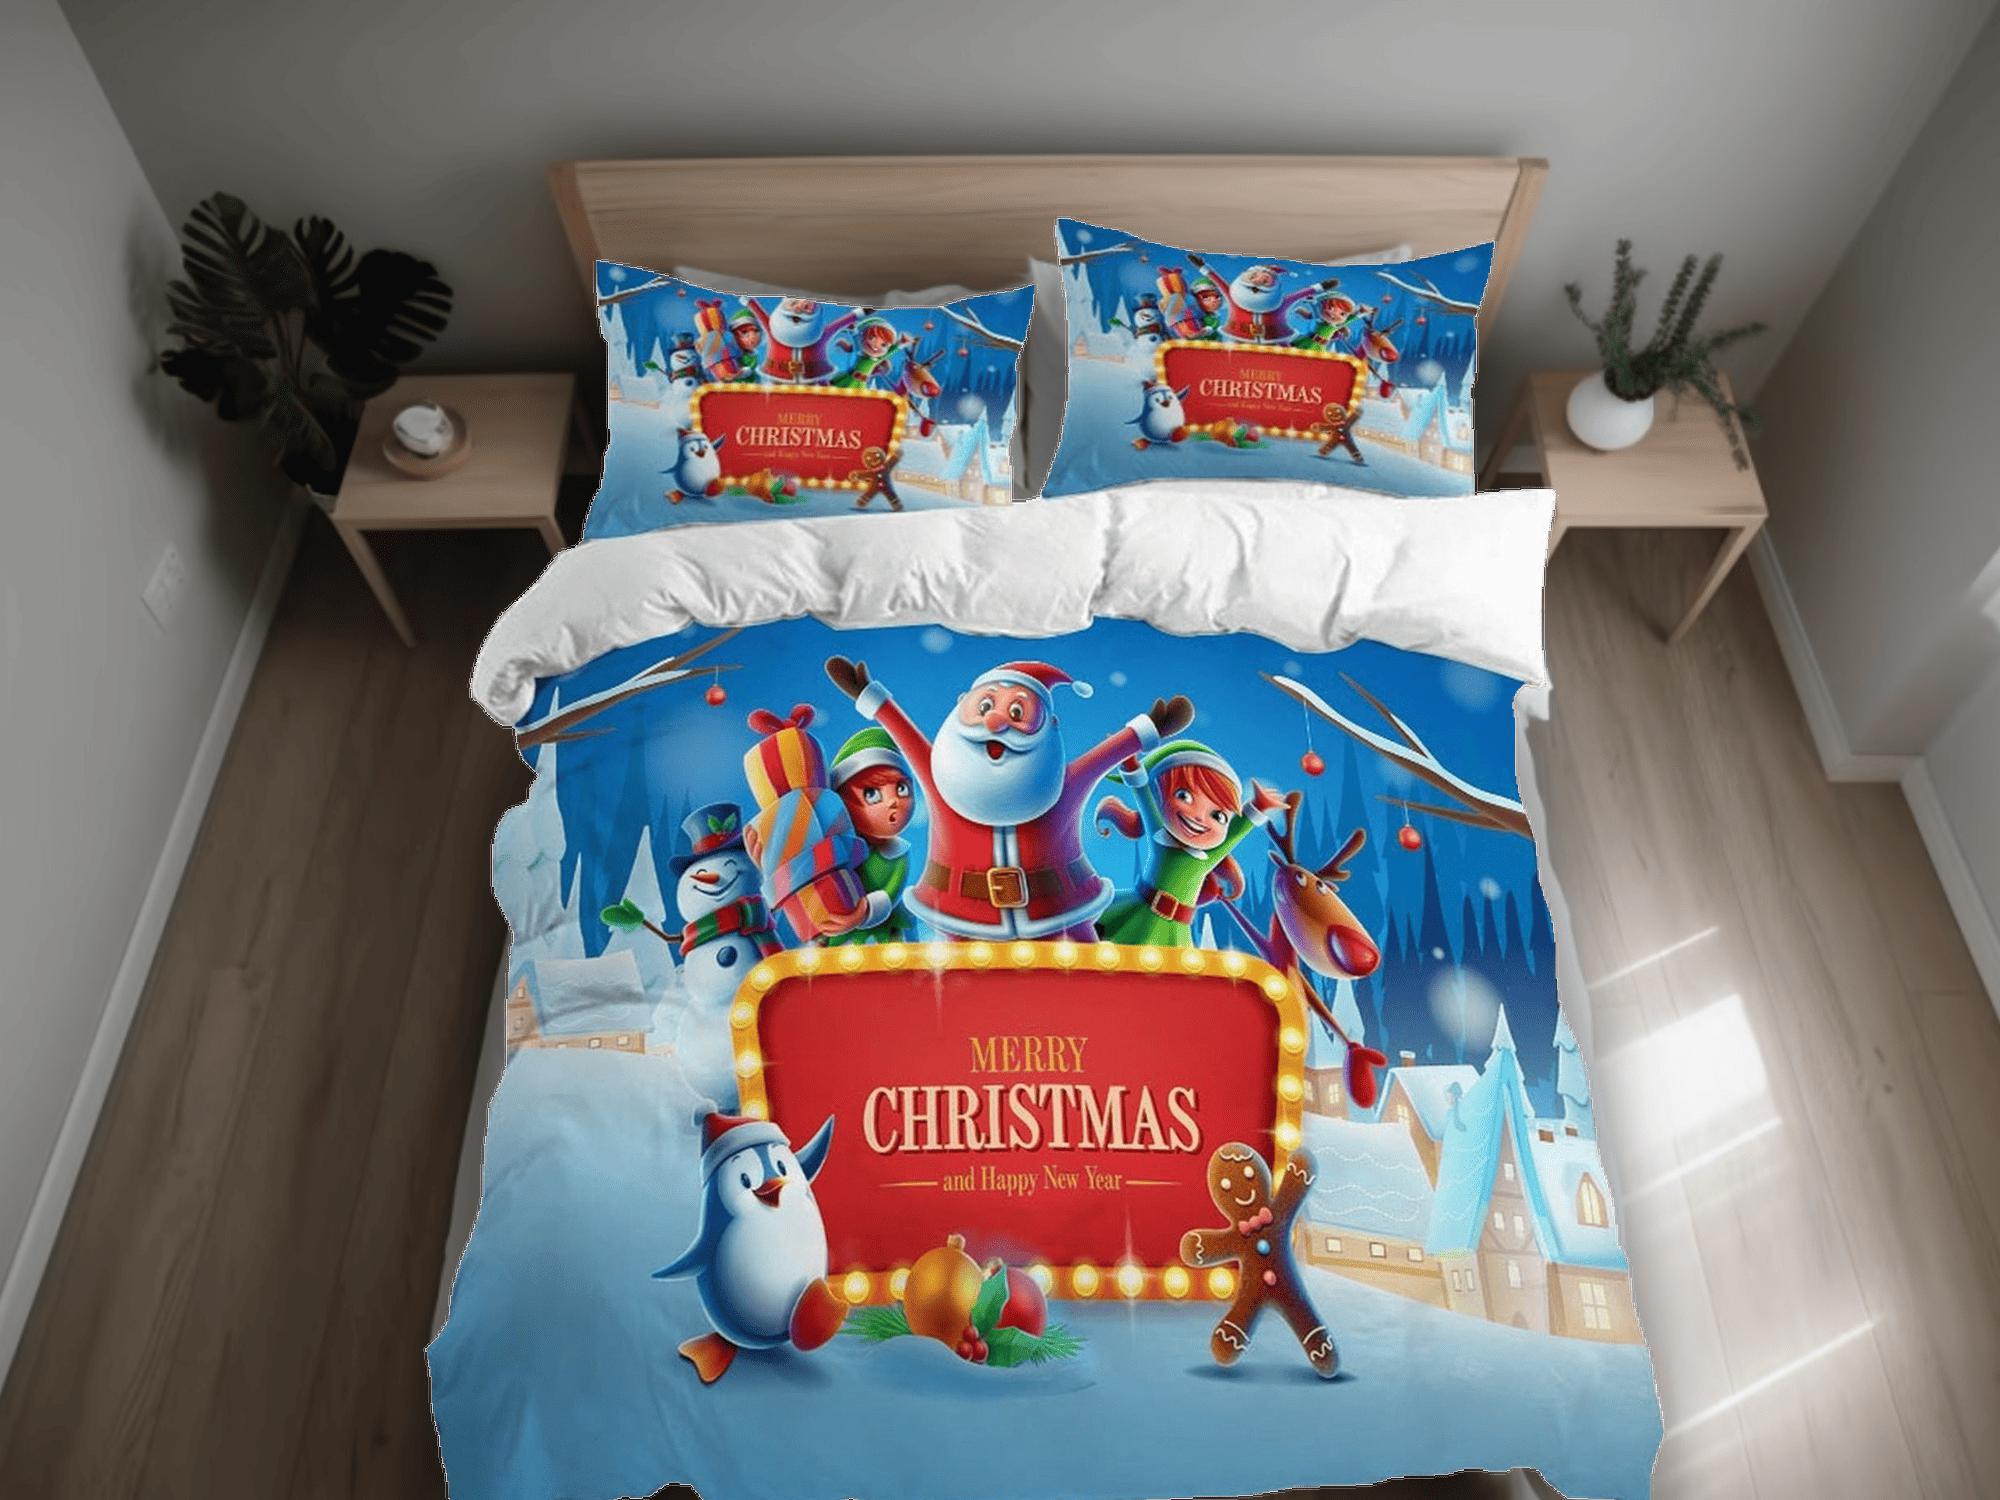 daintyduvet Santa Claus friends Merry Christmas bedding set holiday gift duvet cover king queen full twin toddler bedding baby Christmas farmhouse decor